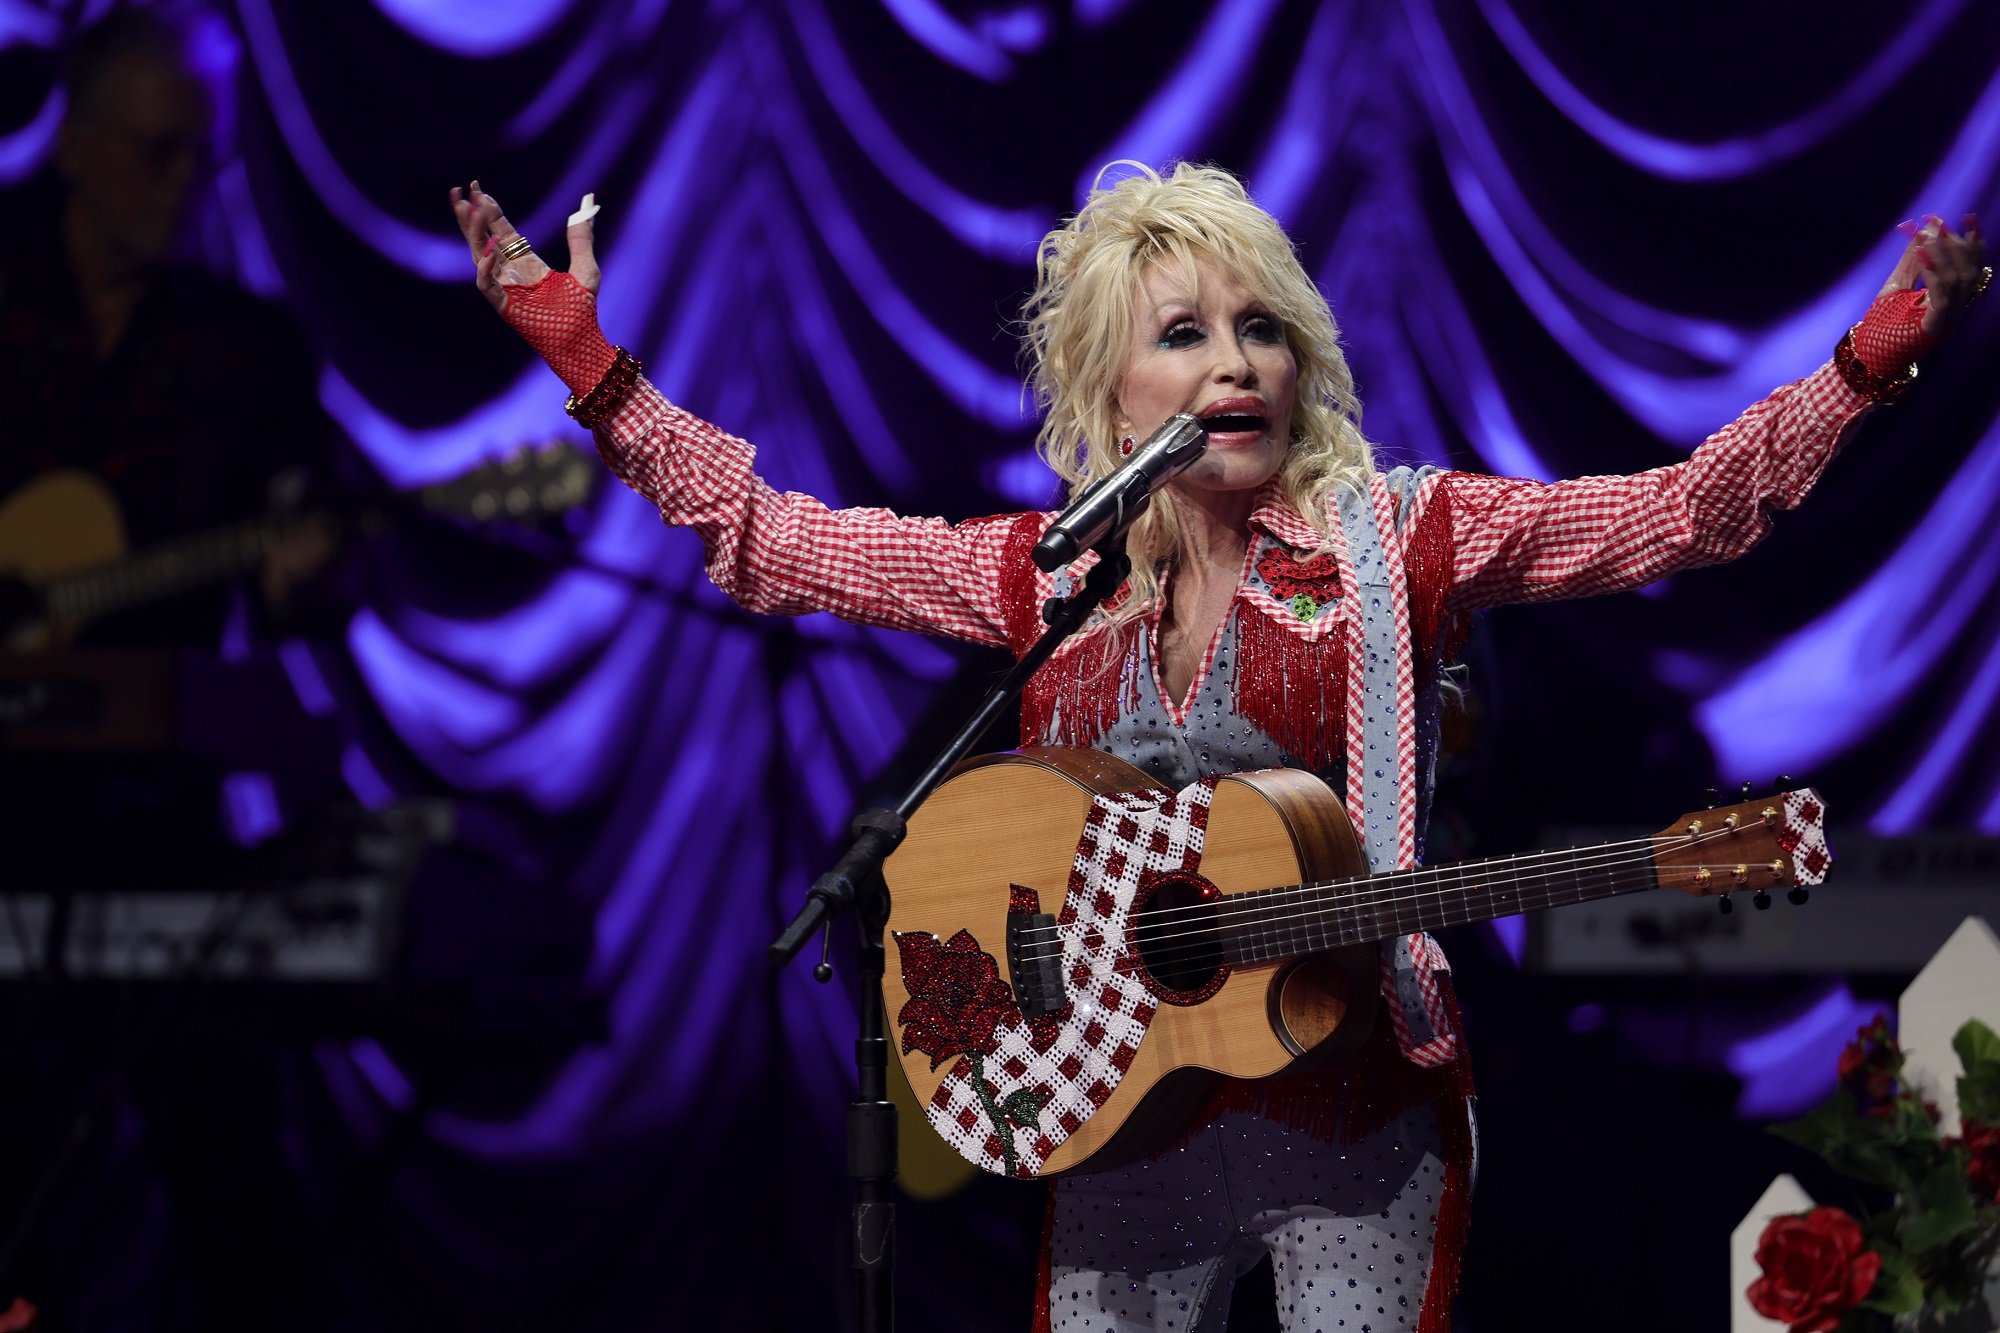 Dolly Parton performs raises her arms onstage while performing with a guitar